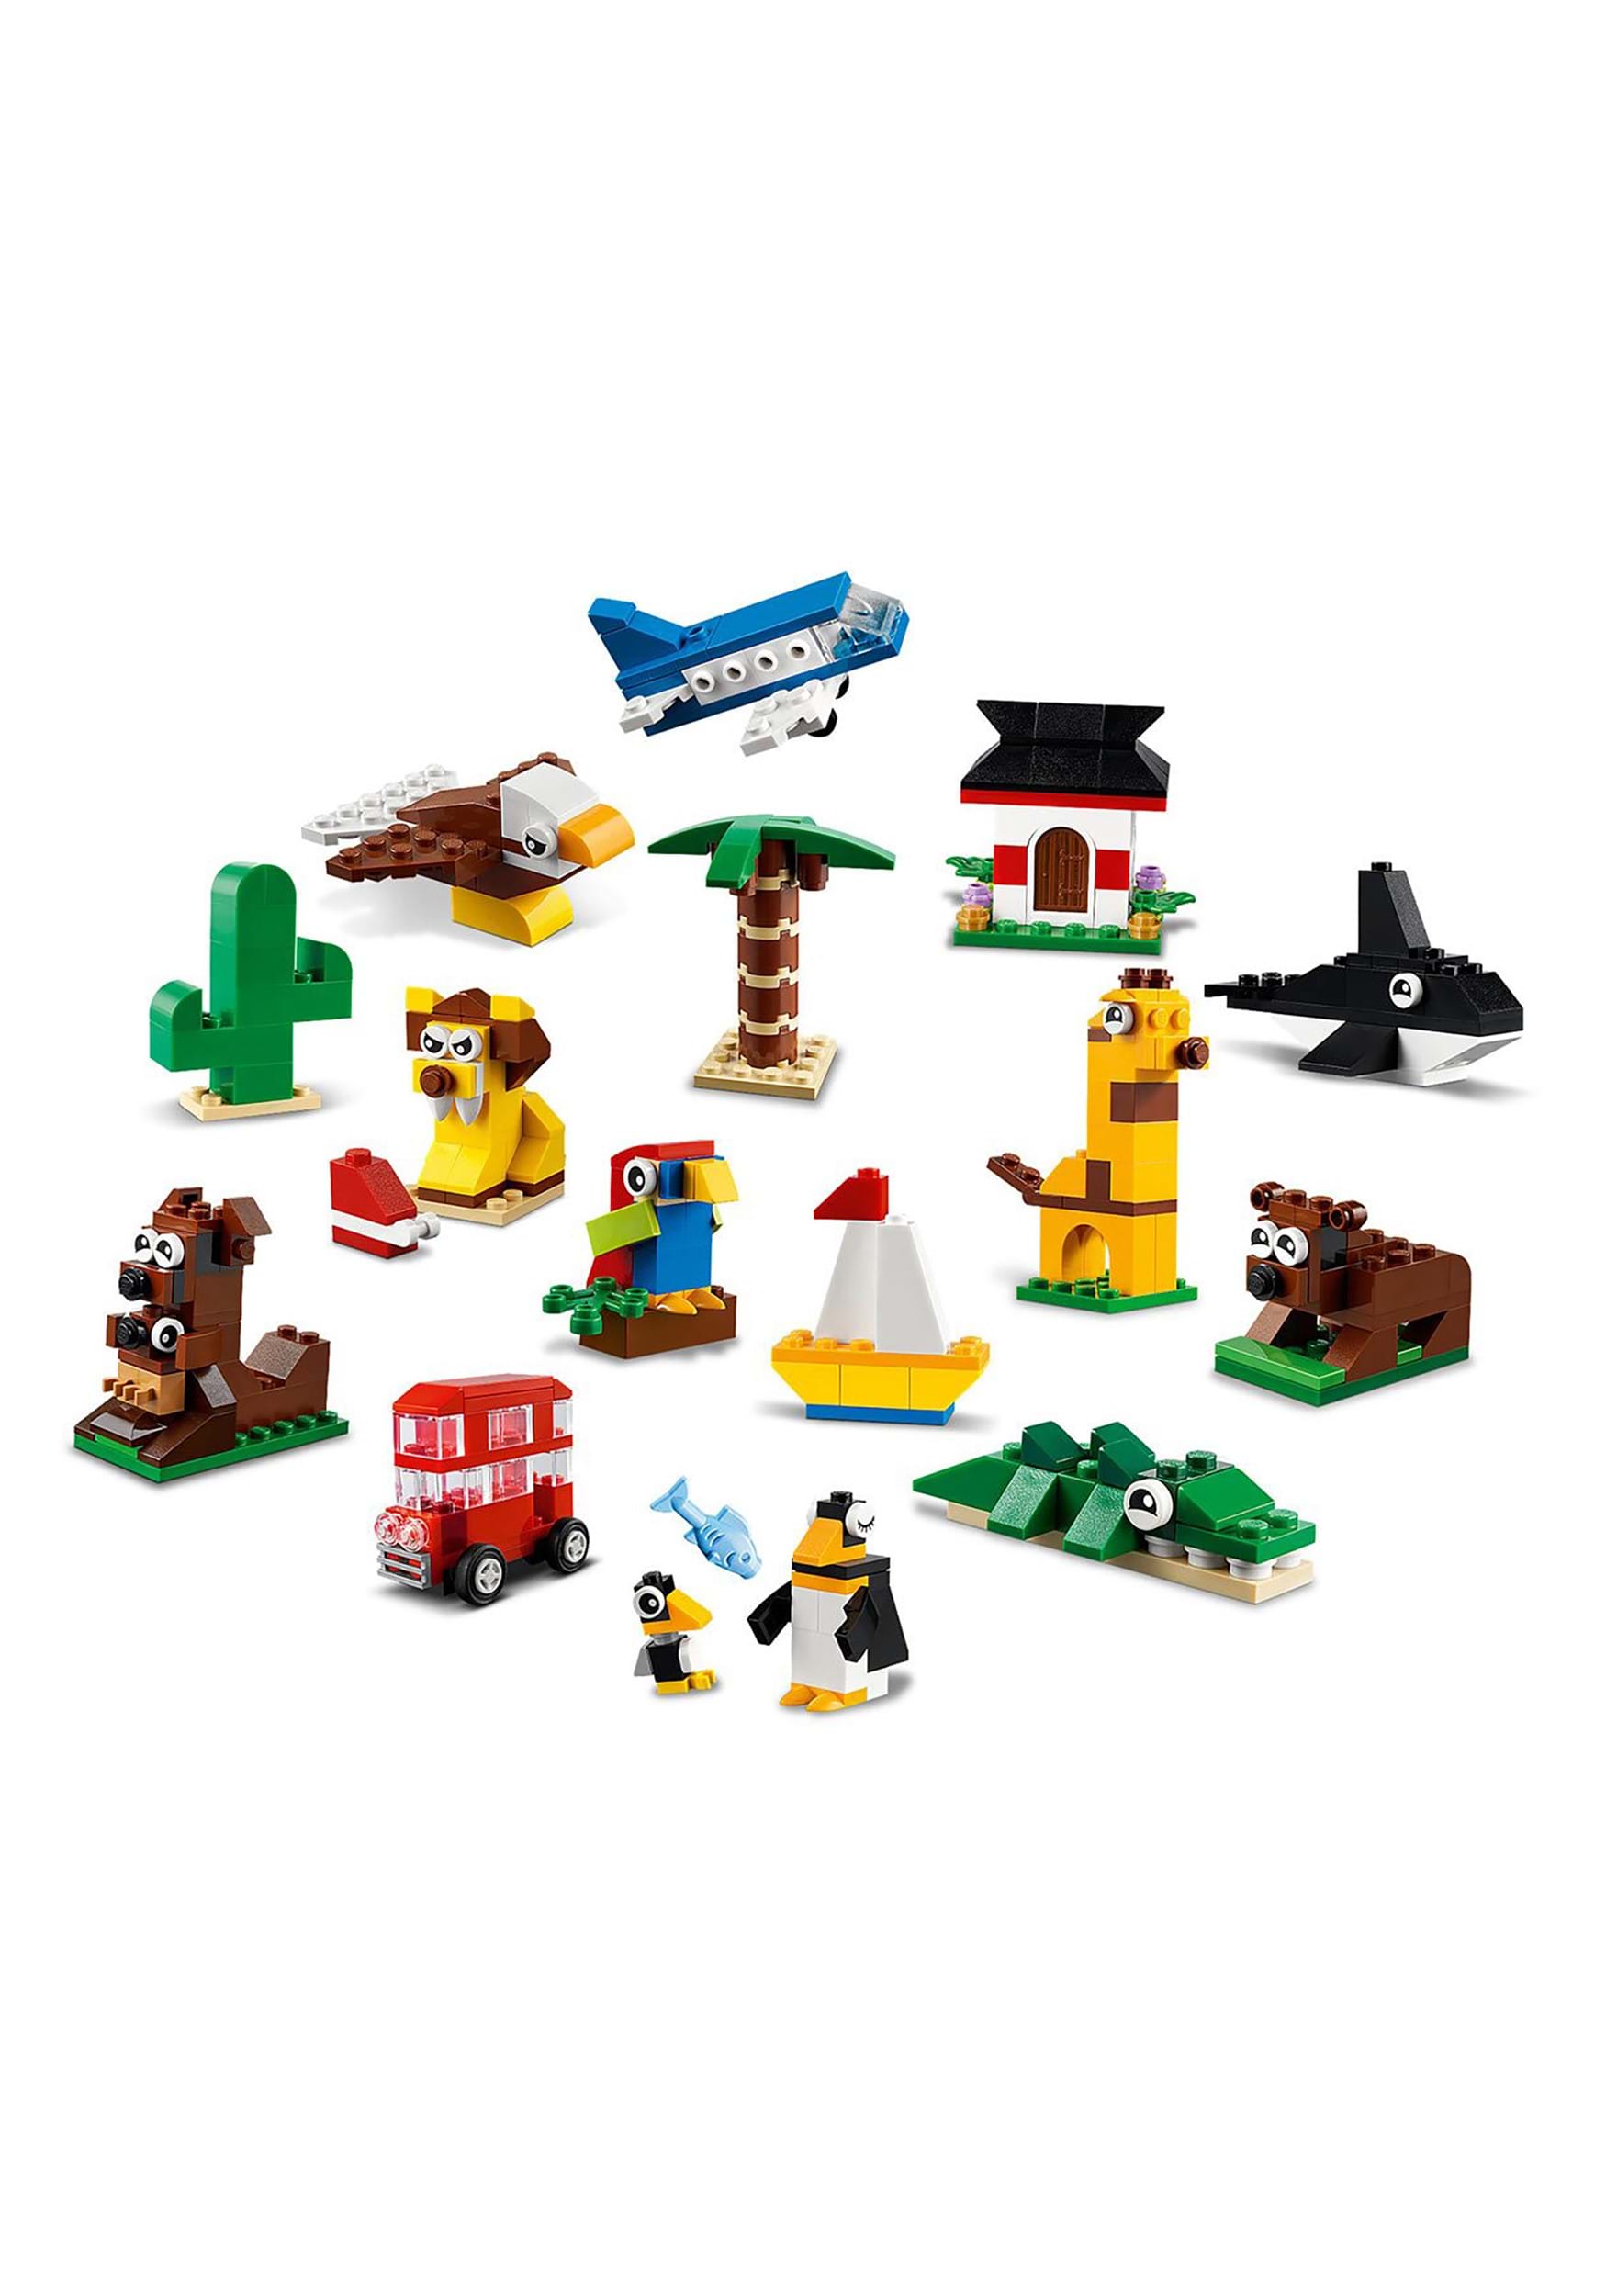 Classic Around The World Playset From LEGO